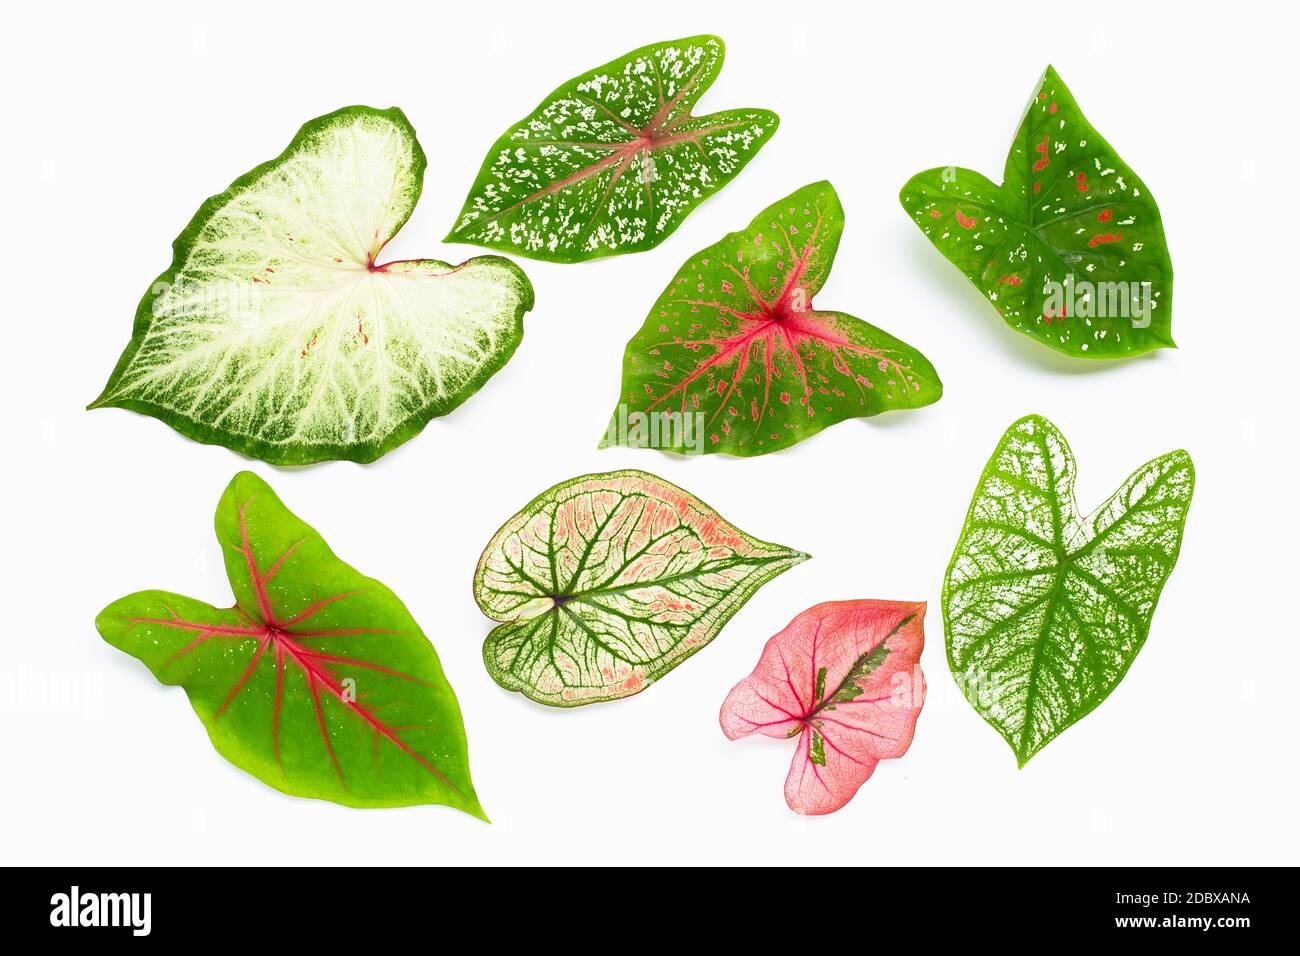 Caladium leaves on white background. Top view Stock Photo - Alamy